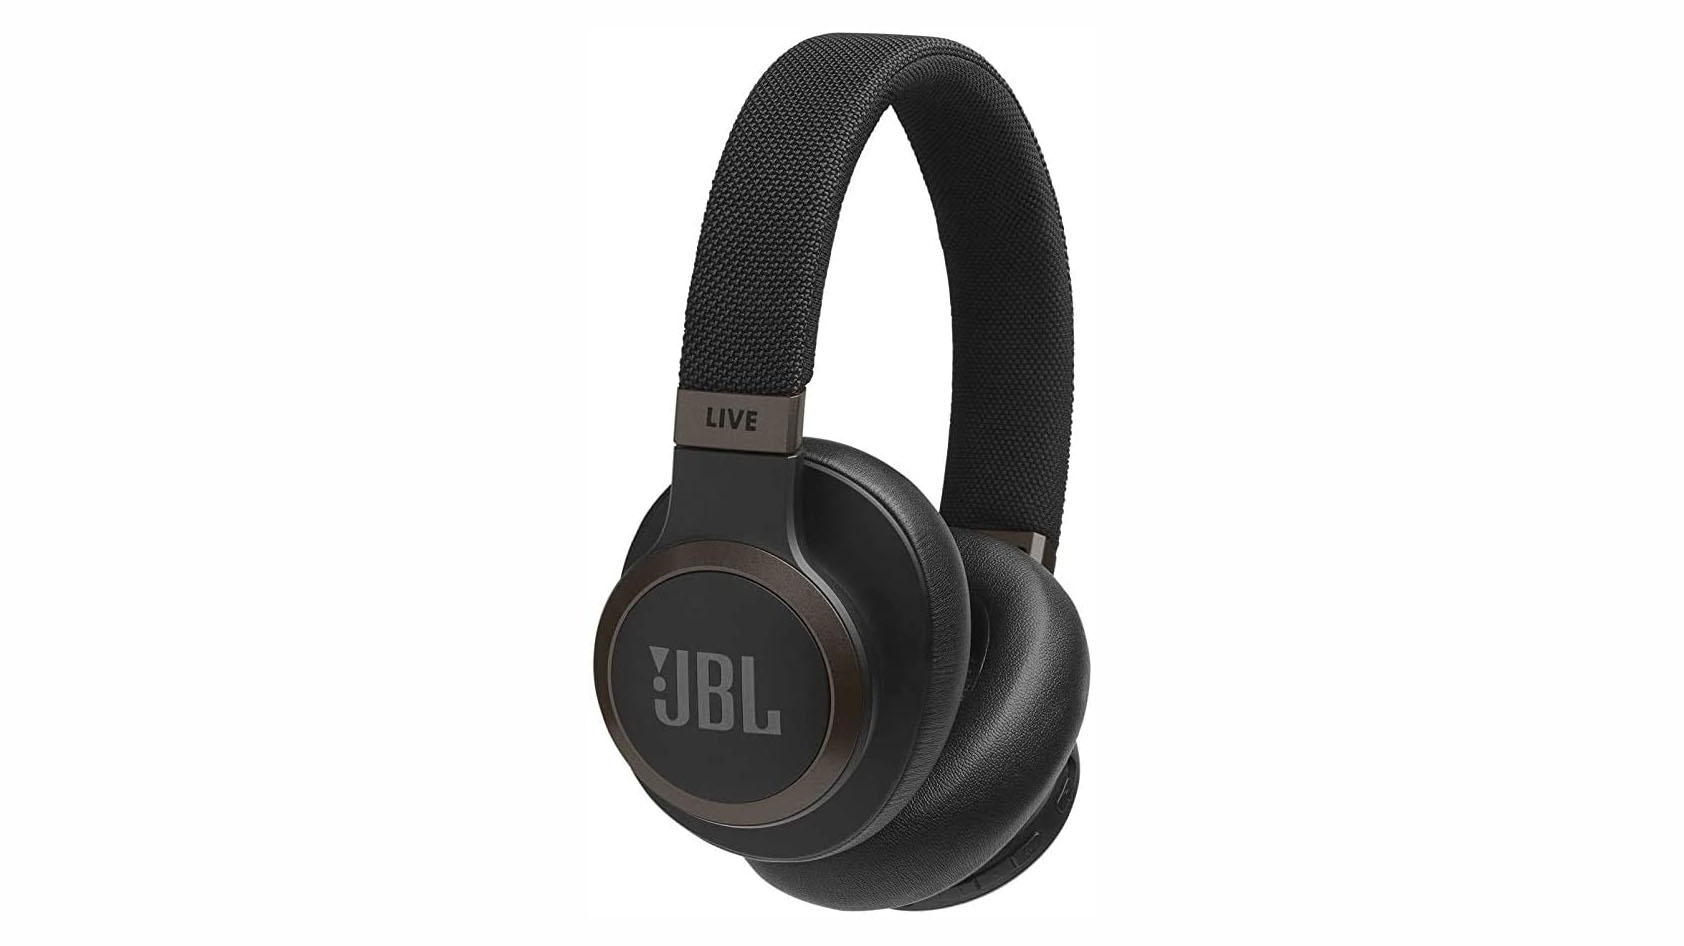 A render of the JBL Live 650BTNC product image against white background.